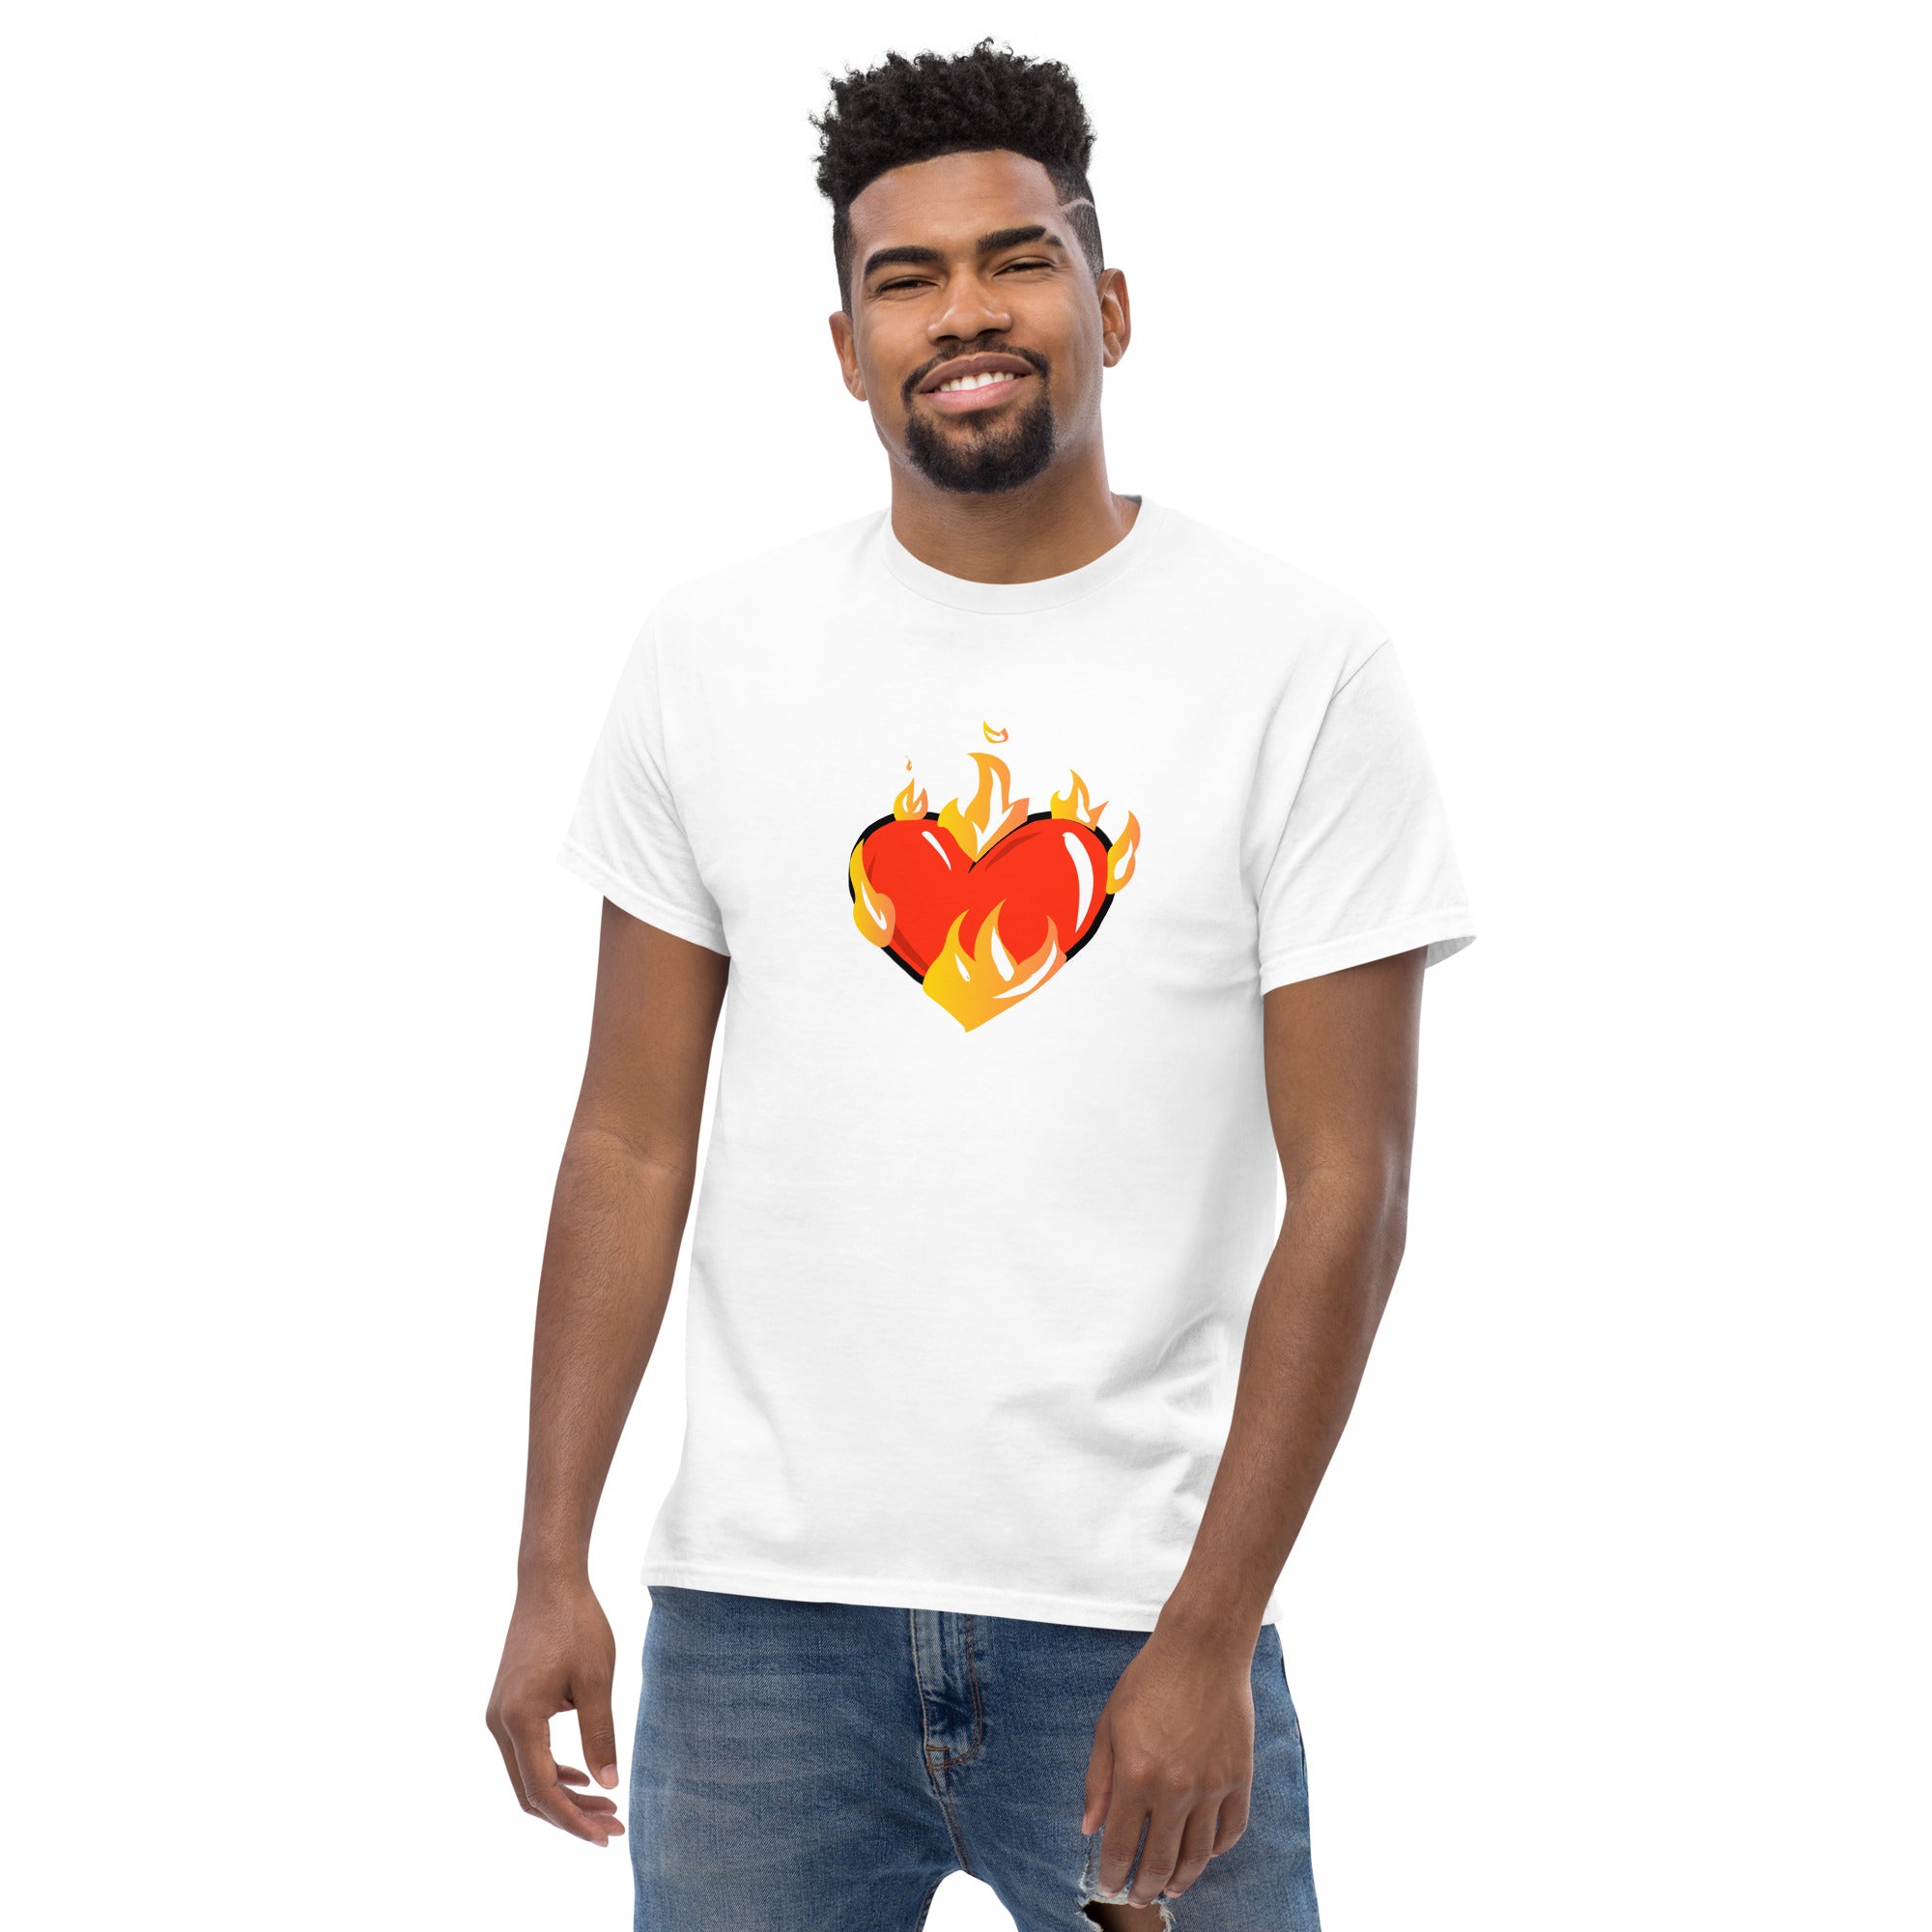 Men's Novelty T Shirts Graphic - Heart on Fire